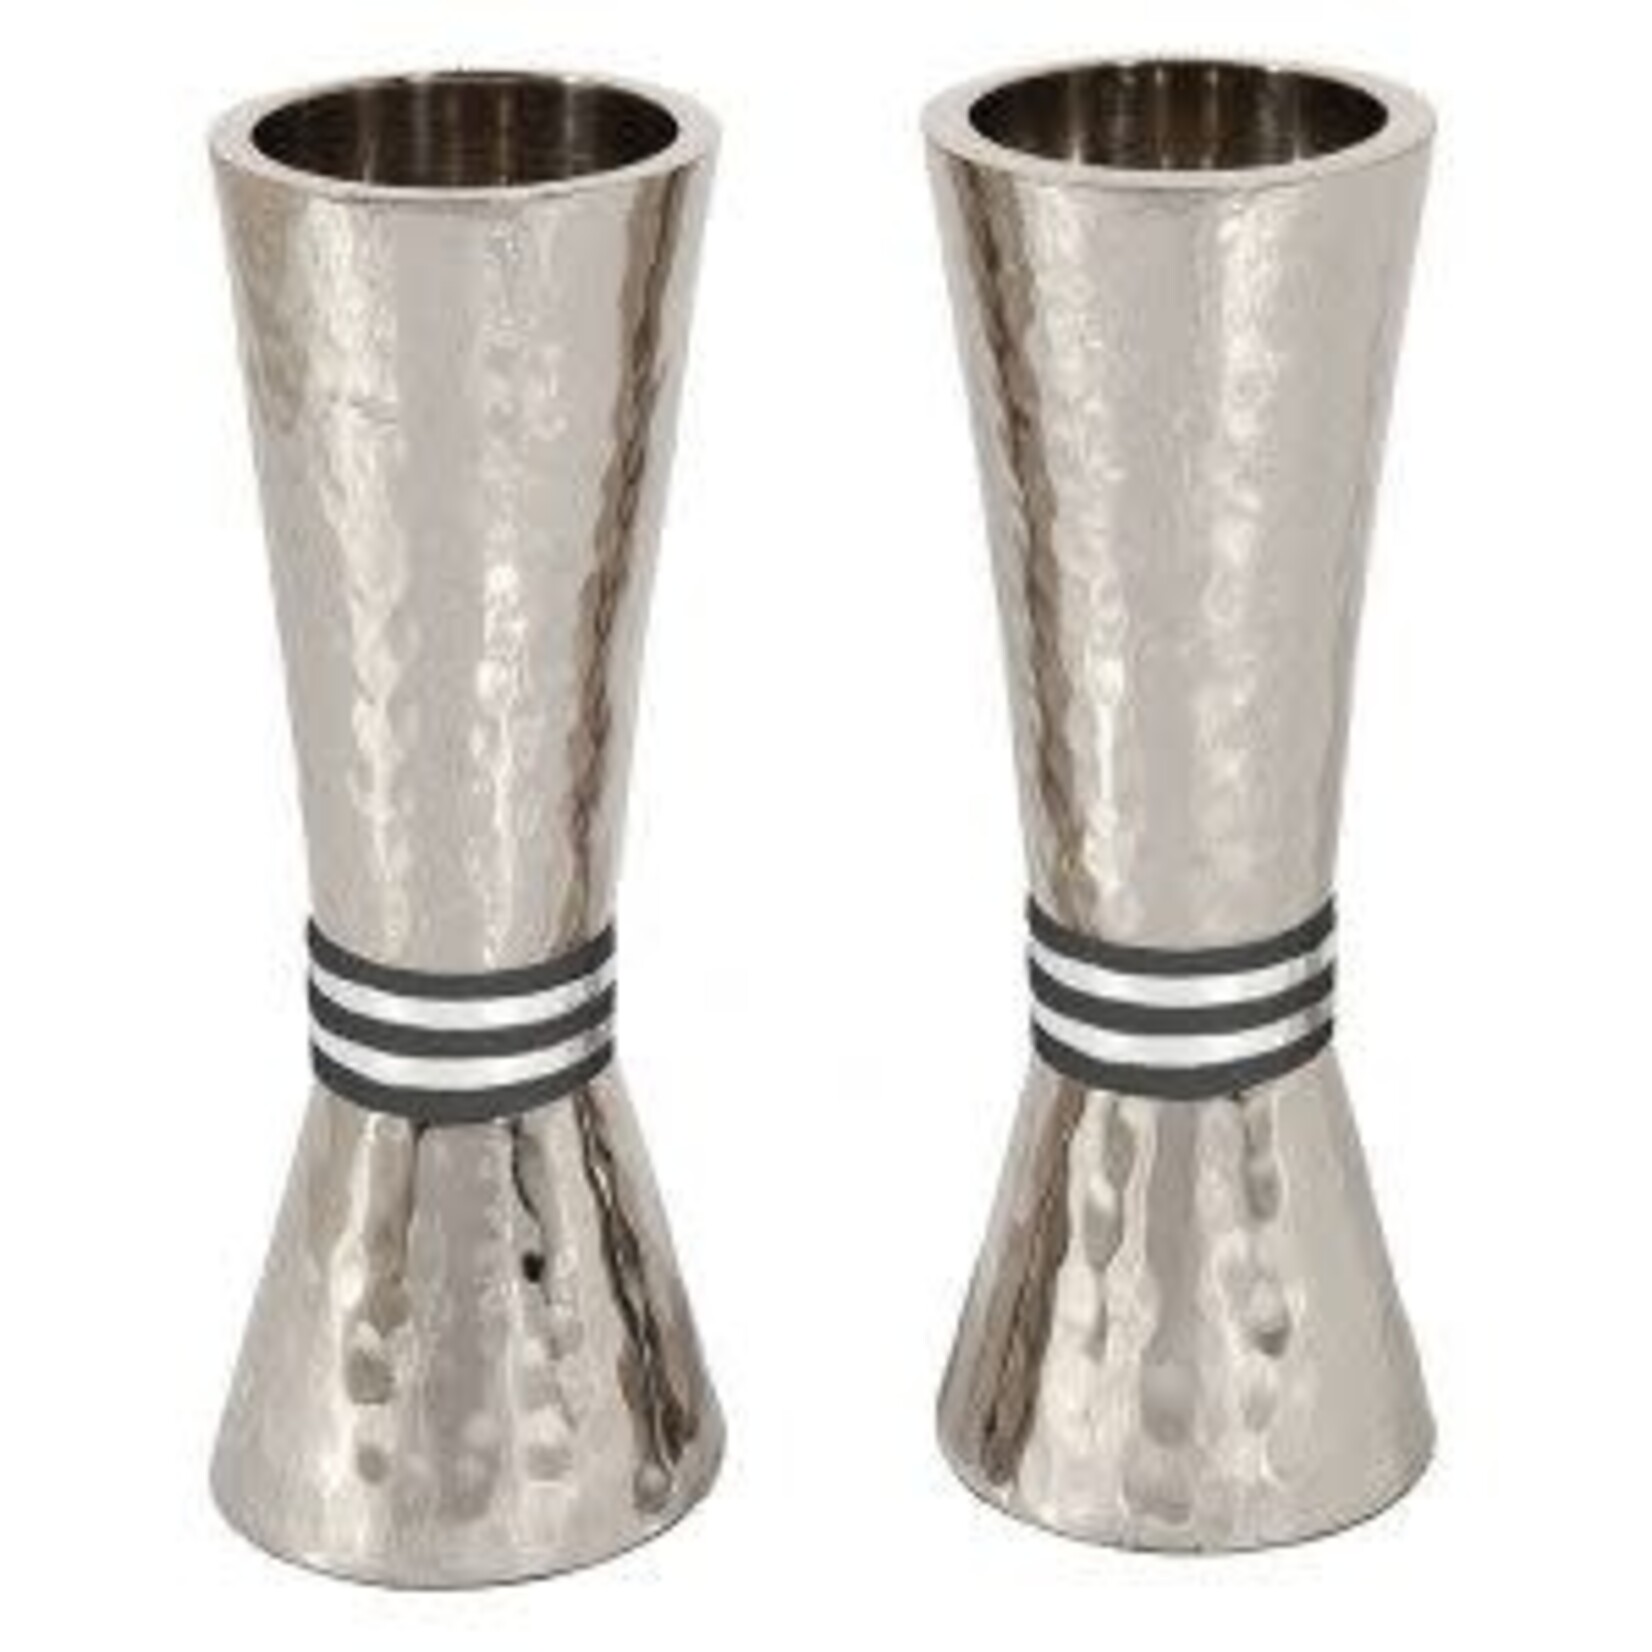 Conical Shaped Hammered Candlesticks - Black Rings